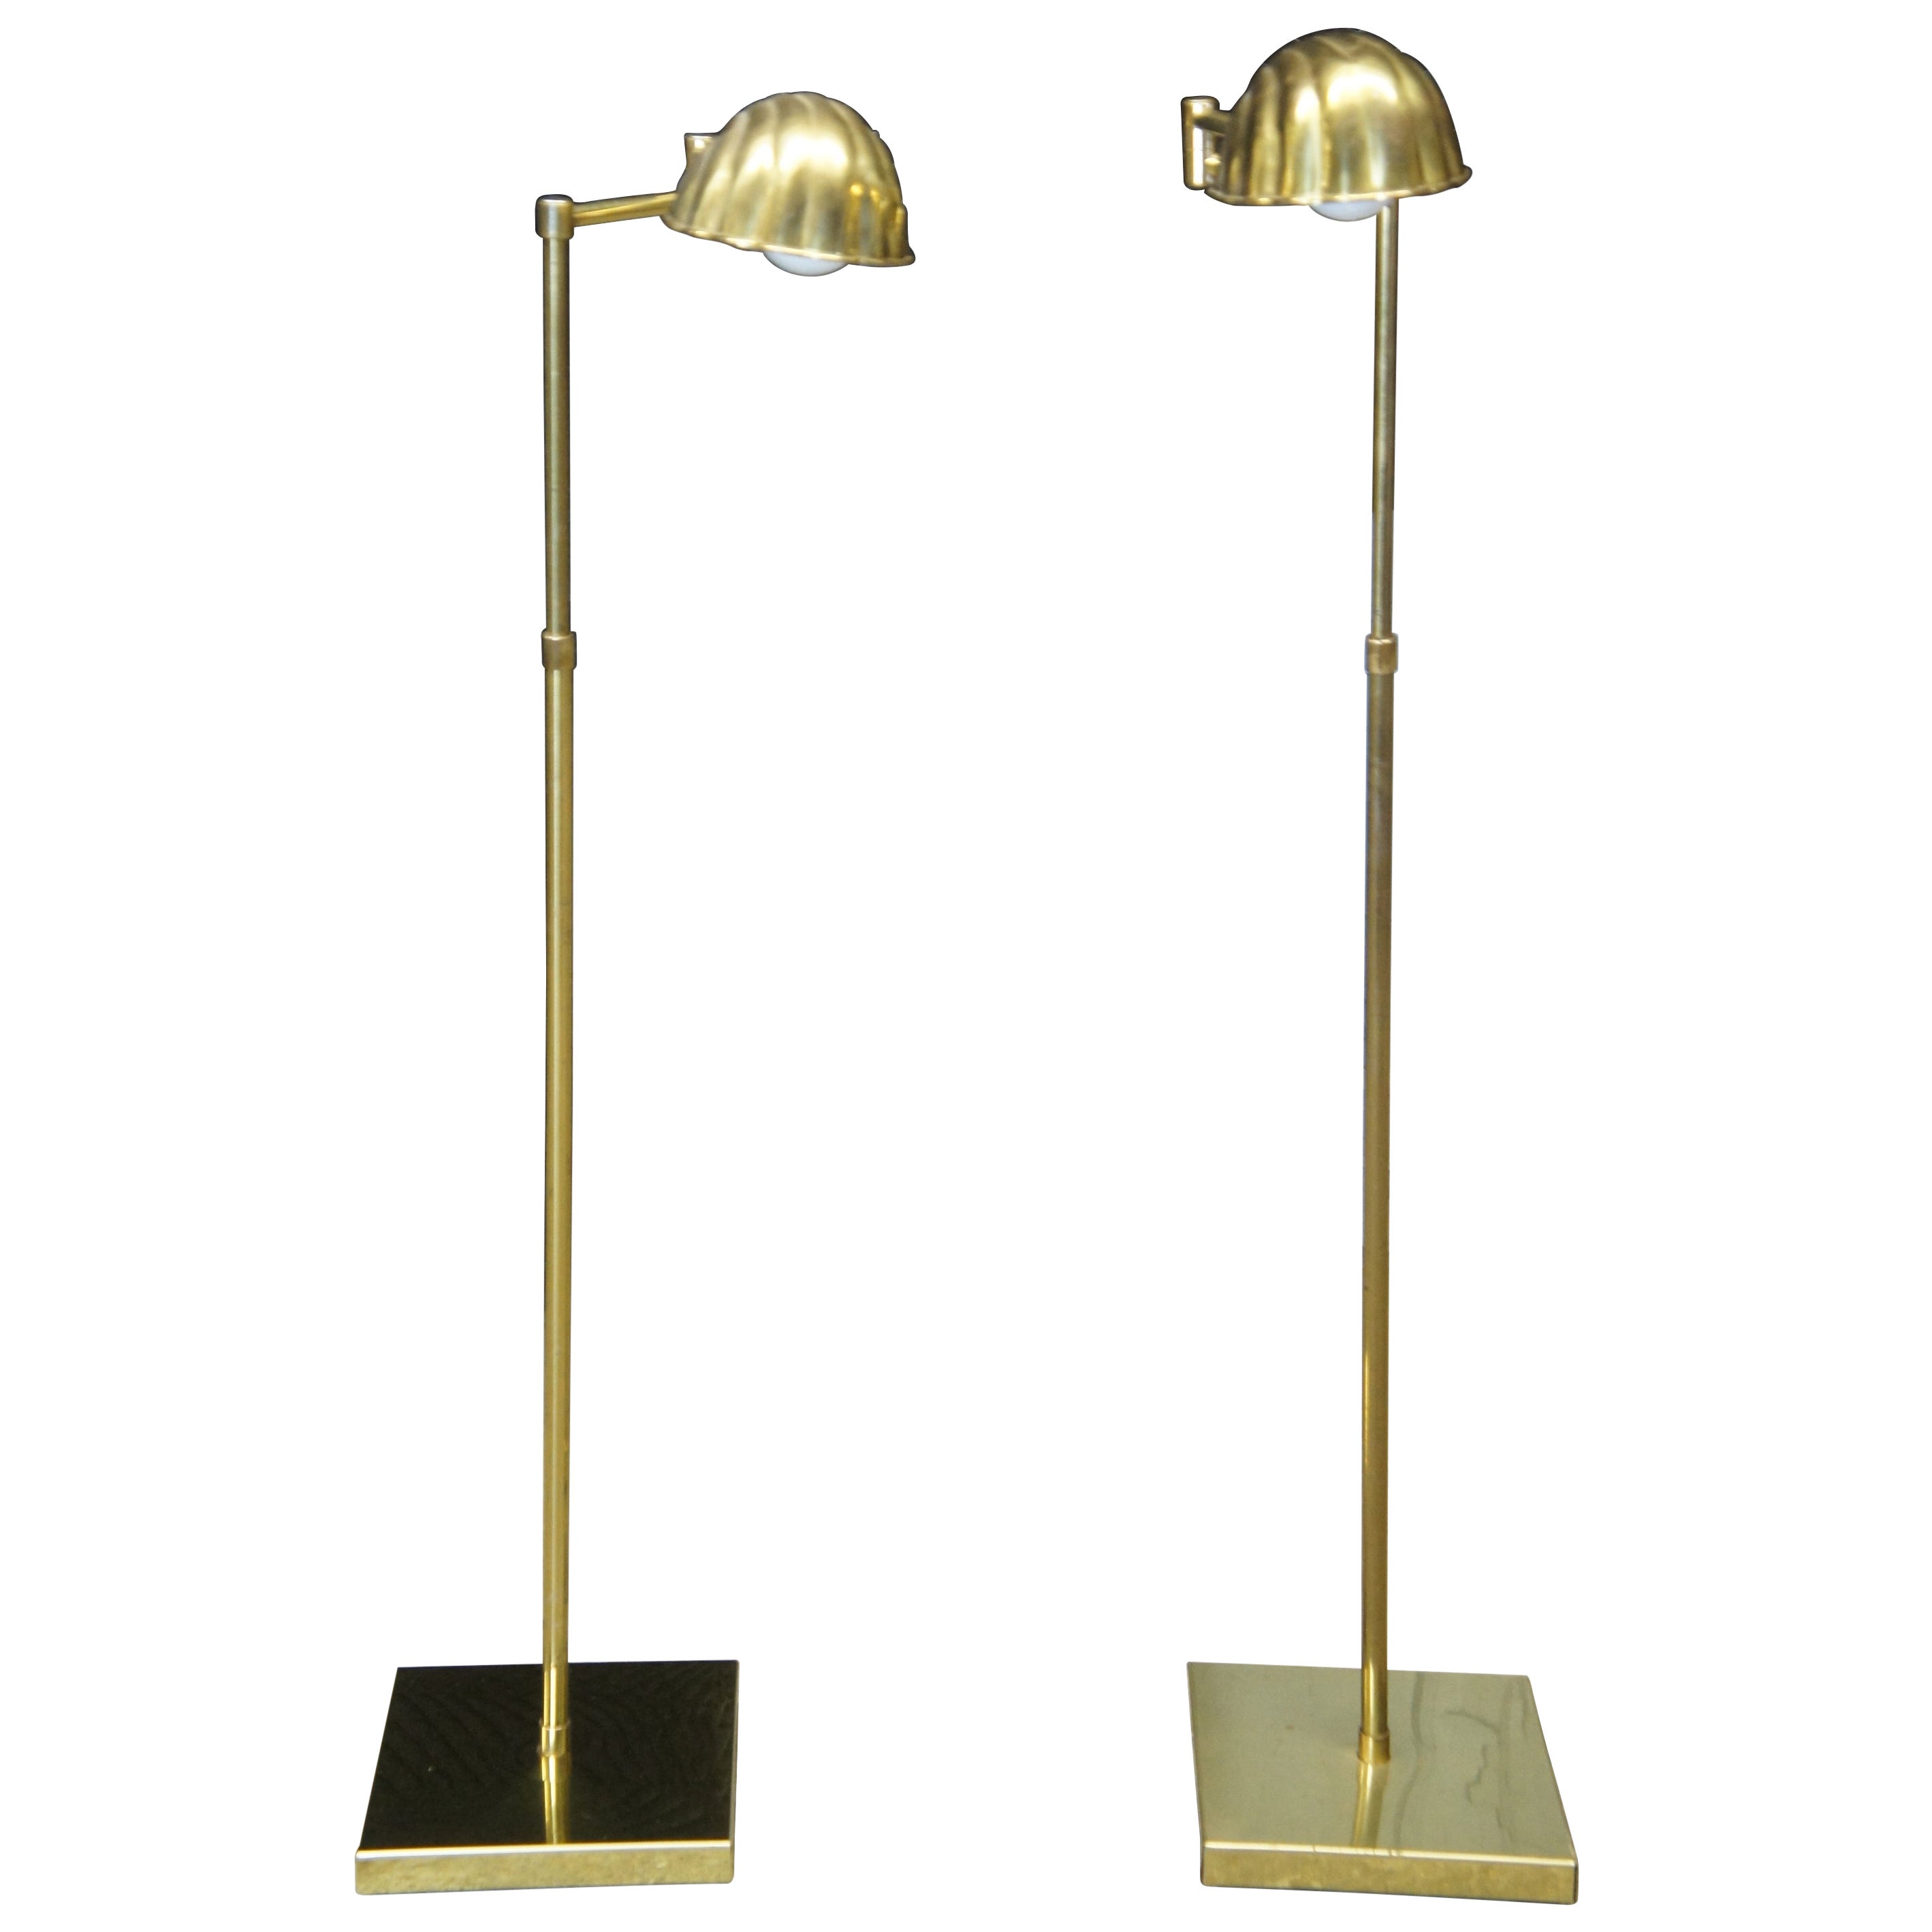 2 Vintage Alsy Clam Shell Brass Adjustable Swing Arm Library Reading Floor Lamp